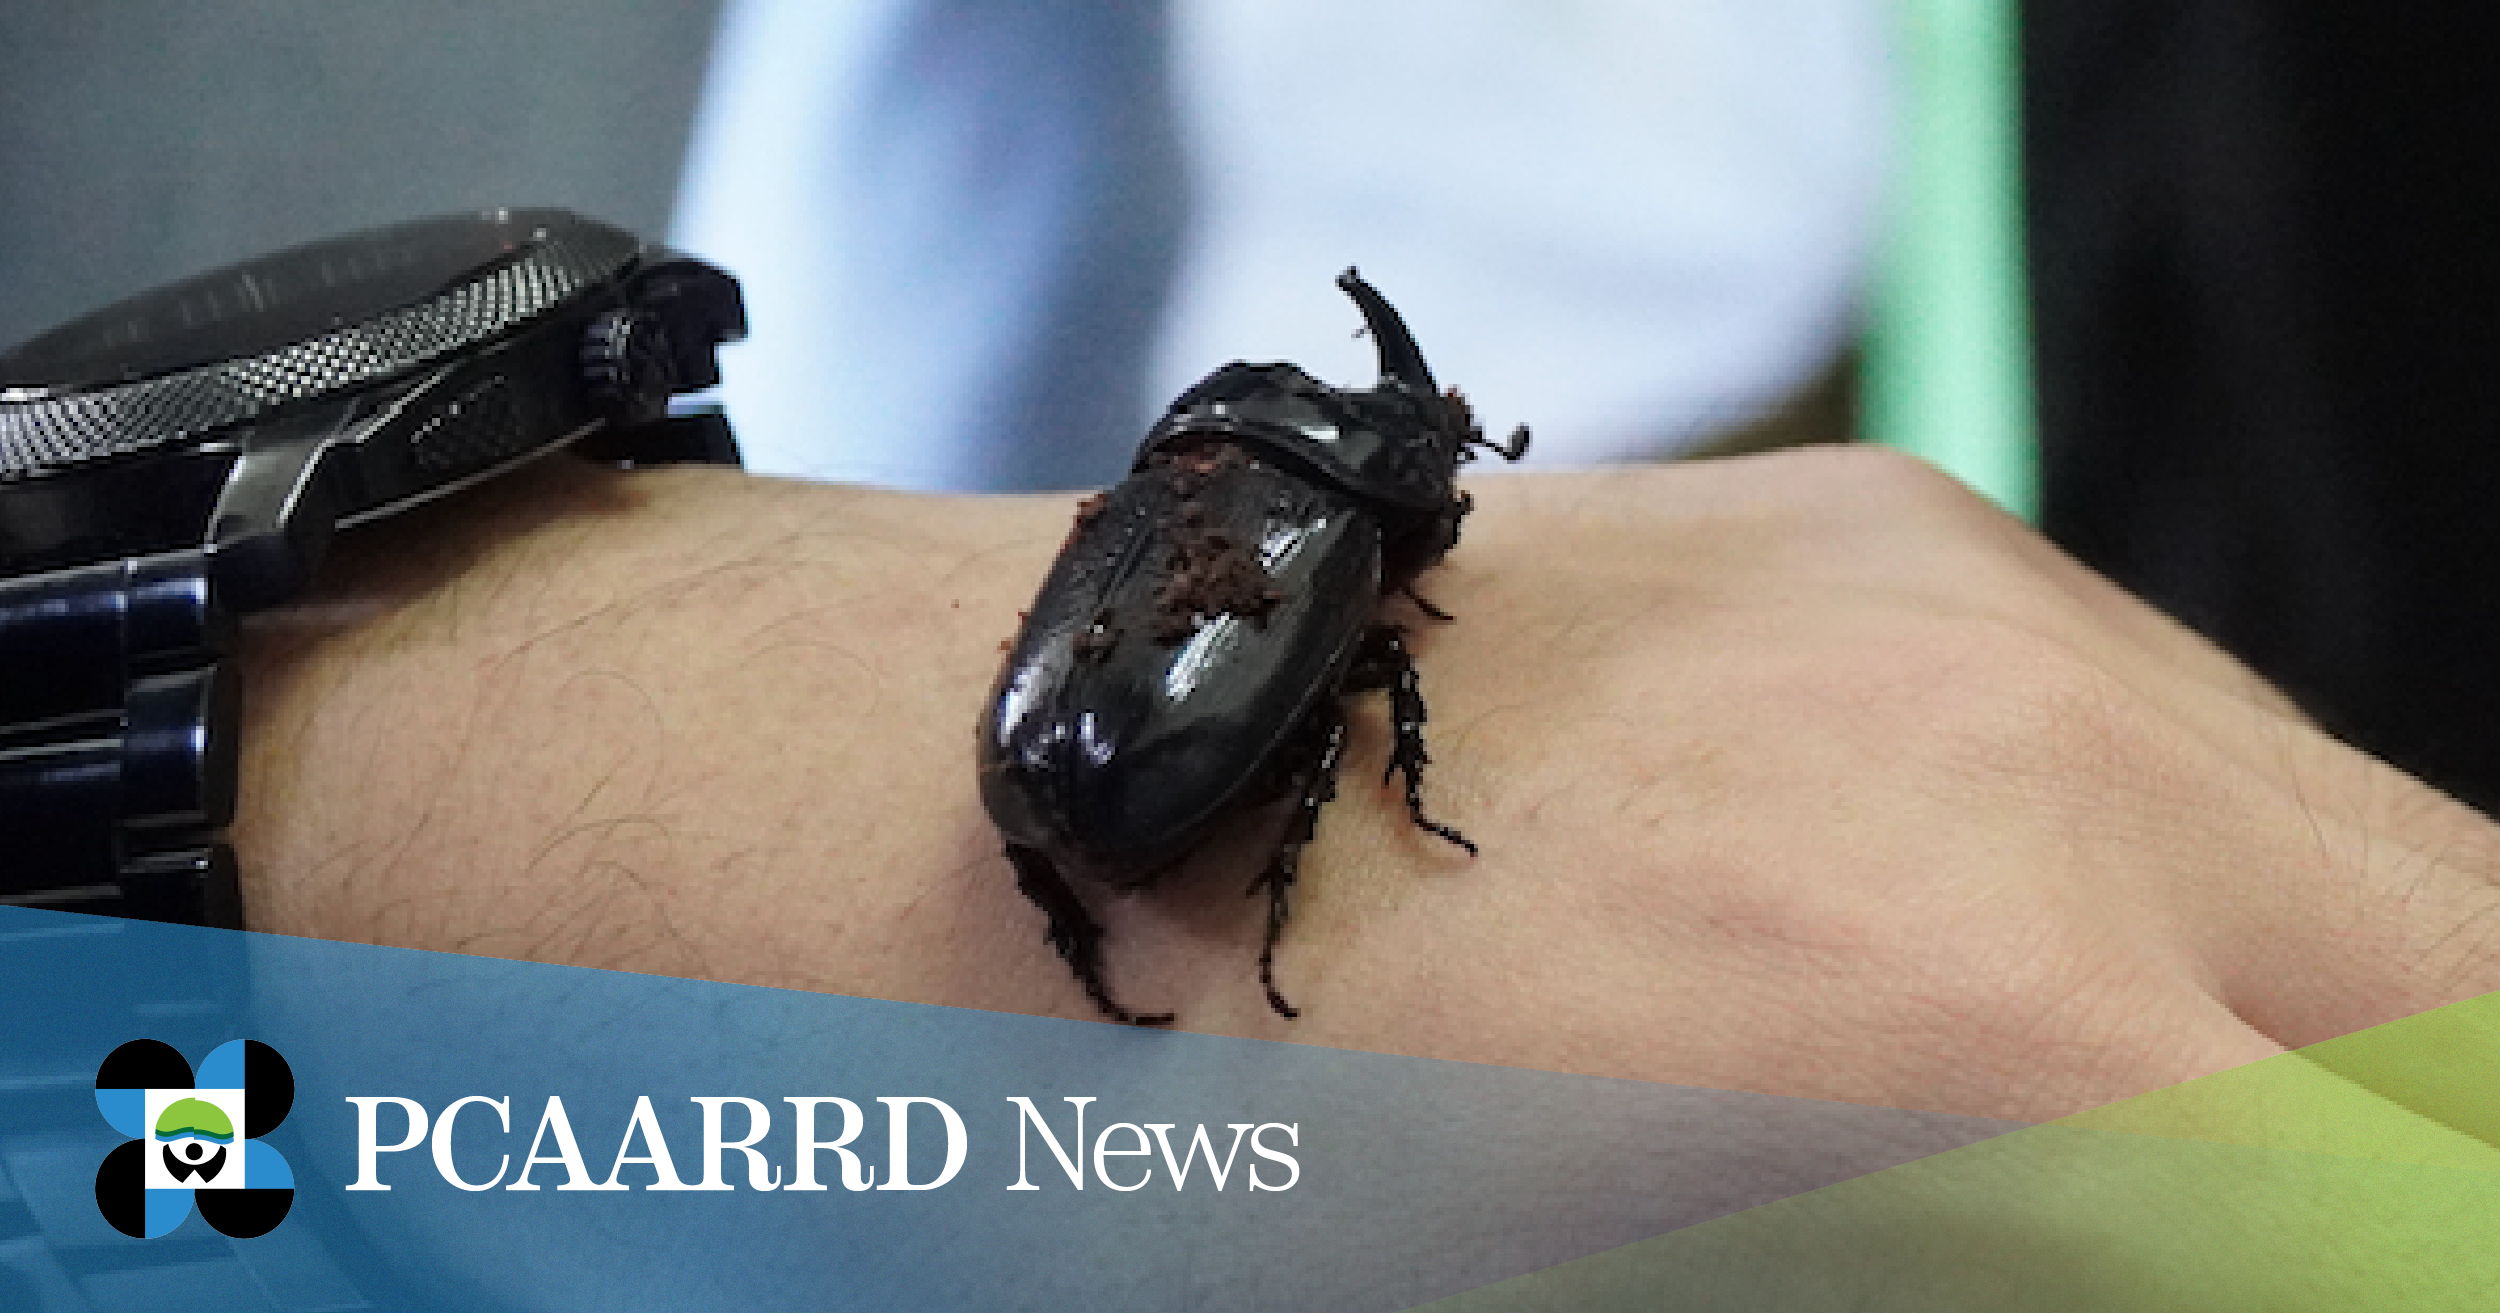 An adult Coconut Rhinoceros Beetle (CRB) reared at the Philippine Coconut Authority-Albay Research Center. (Image credit: CRD, DOST-PCAARRD)